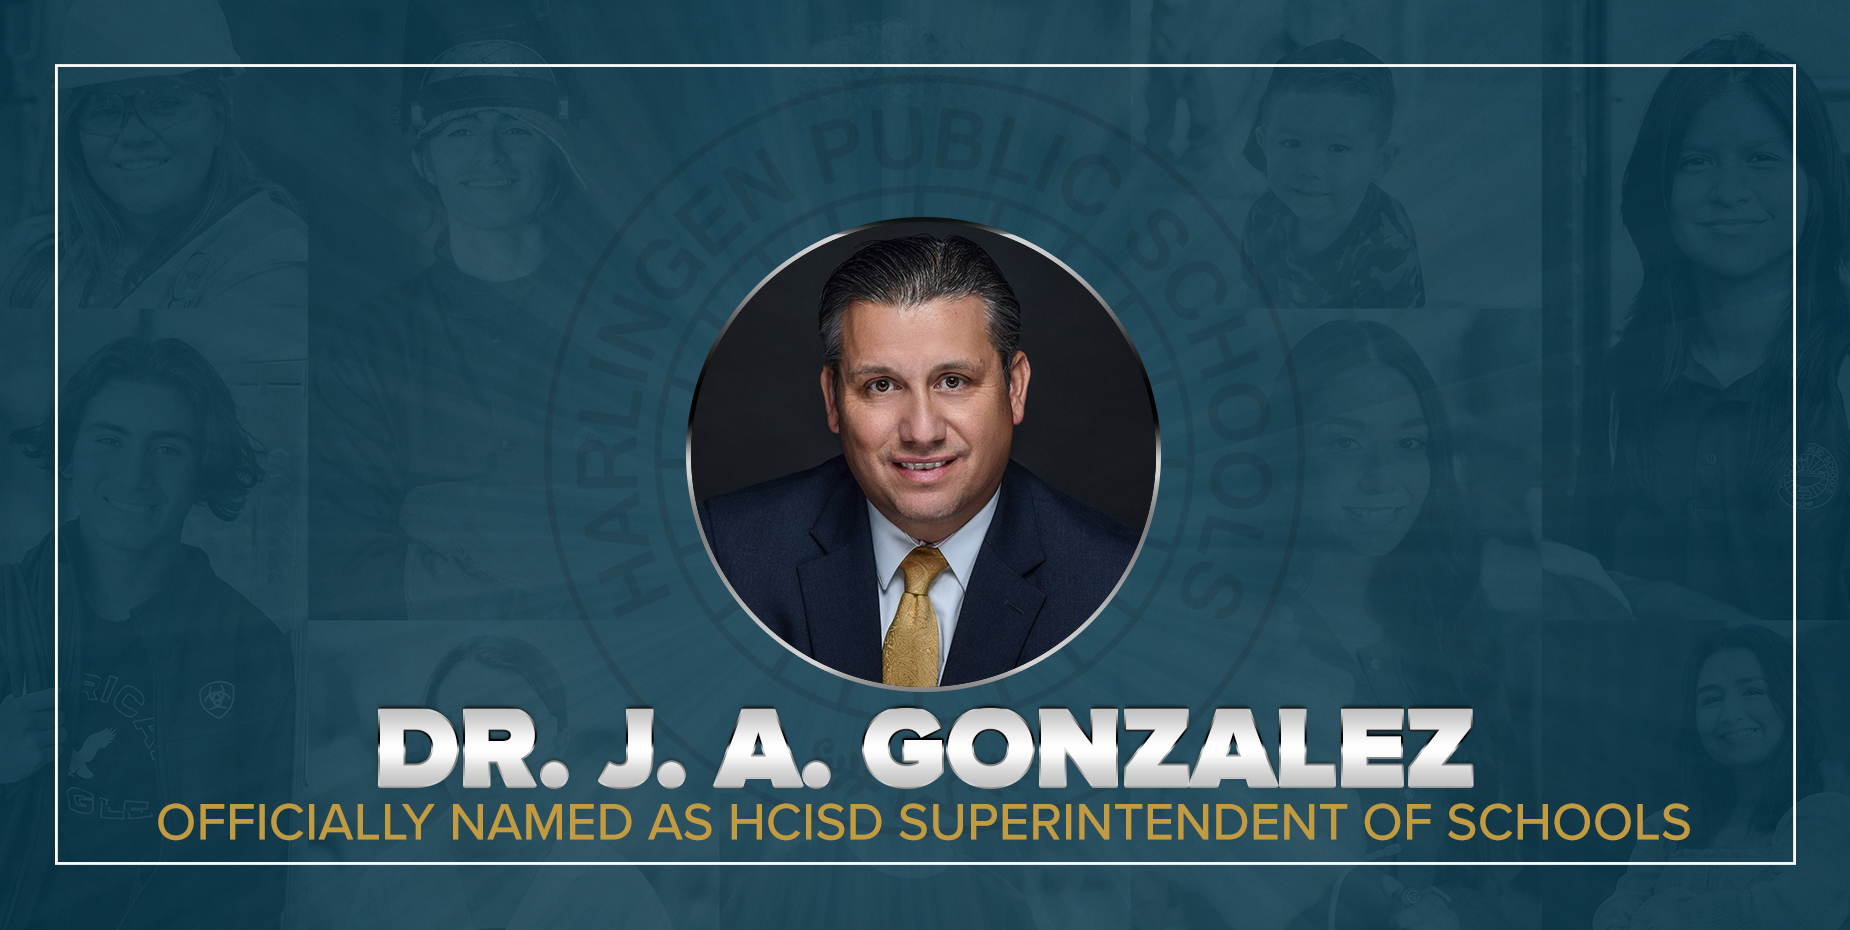 Dr. J.A. Gonzalez officially named as HCISD Superintendent of Schools